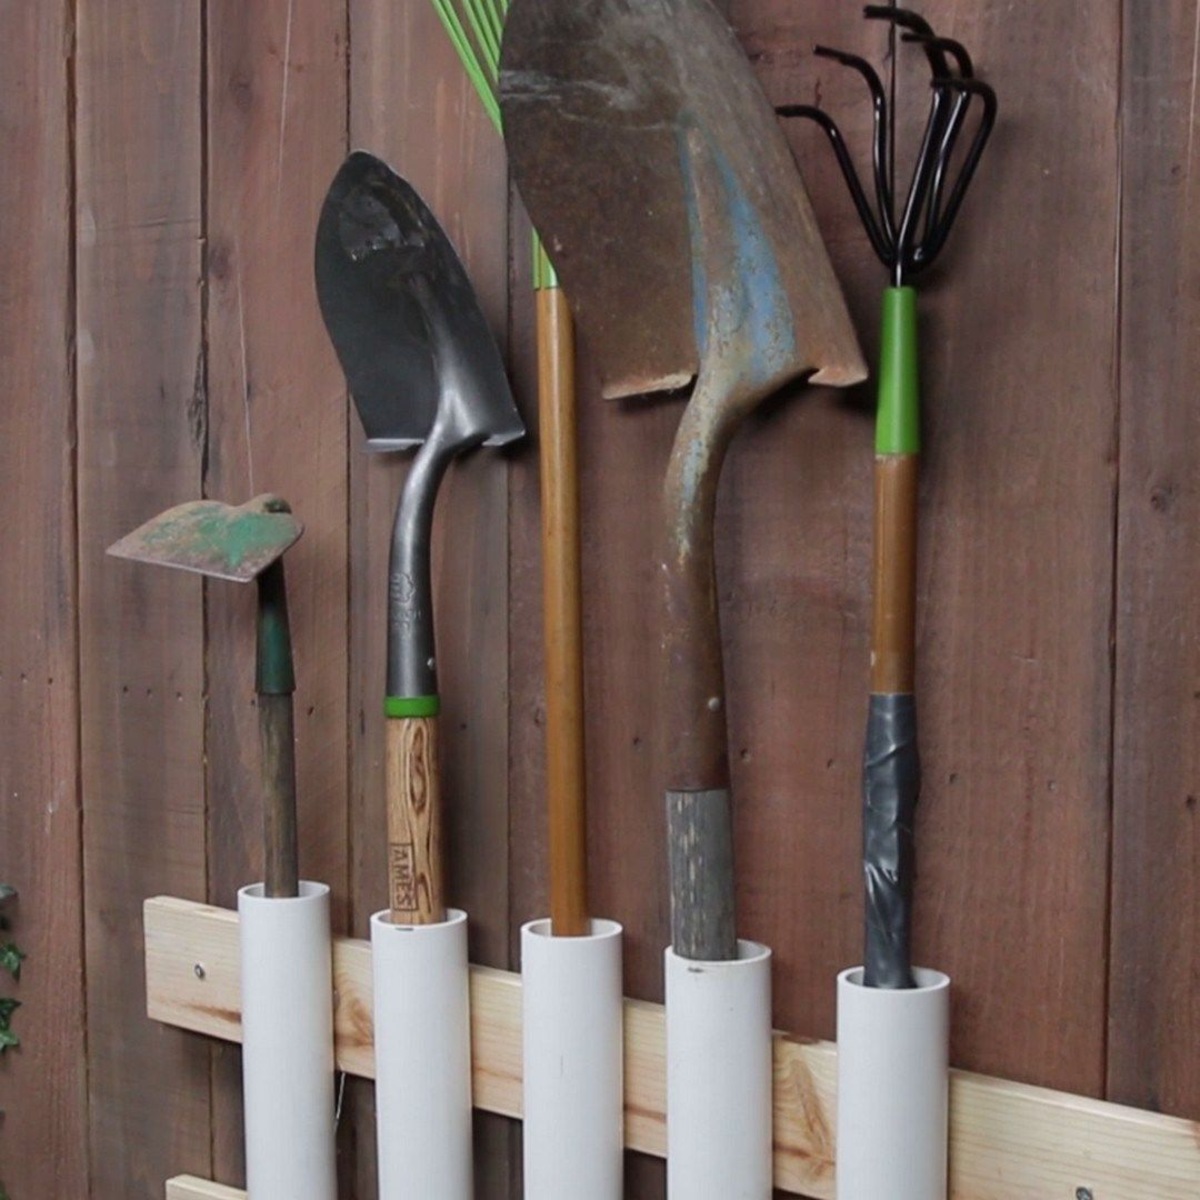 How To Store Garden Tools In A Shed